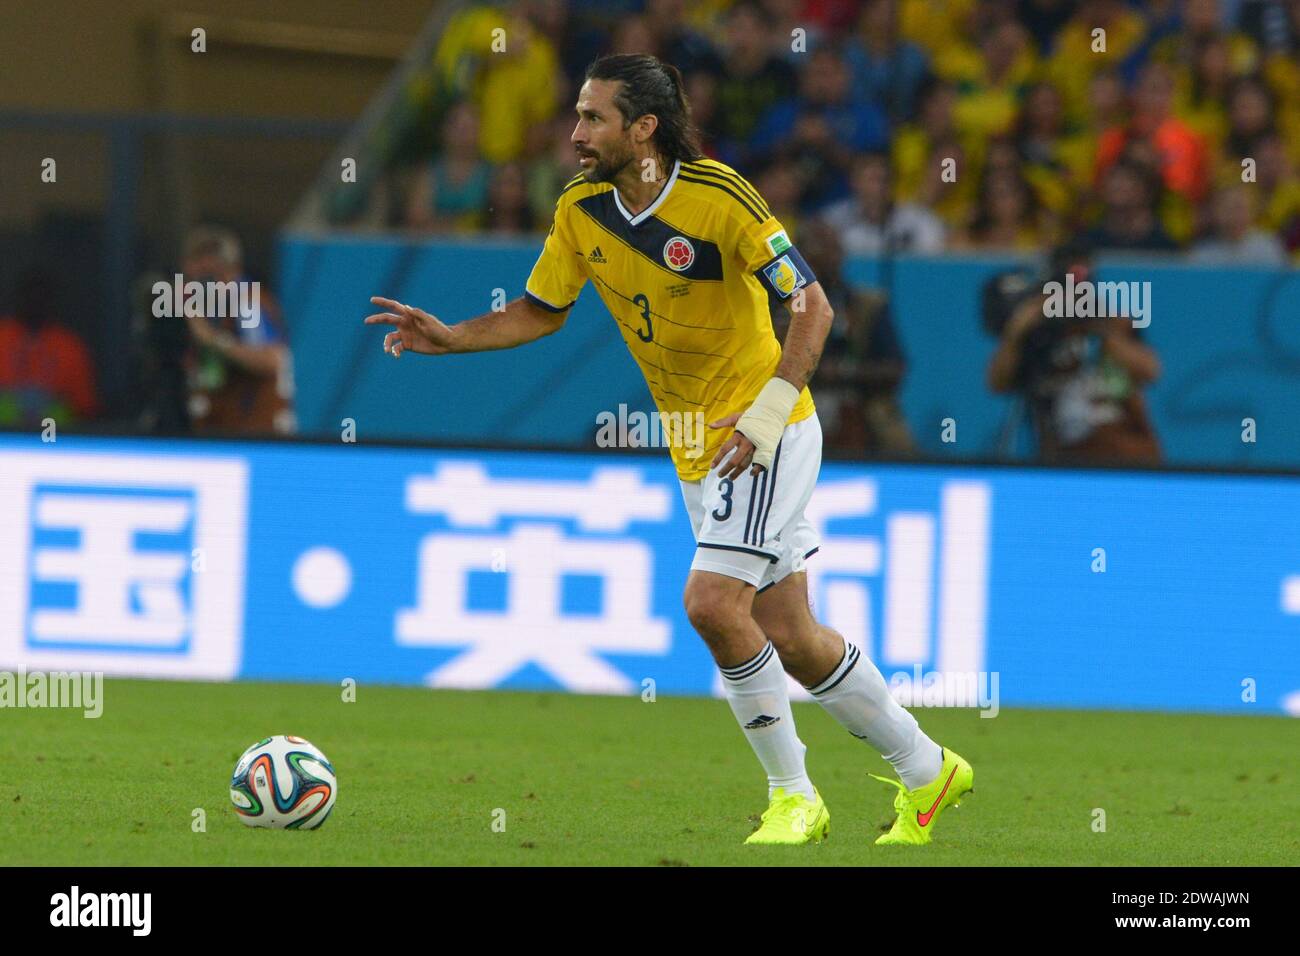 Colombia's Mario Yepes during Soccer World Cup 2014 1/8 of final round match Colombia v Uruguay at Maracana Stadium, Rio de Janeiro, Brazil on June 28, 2014. Colombia won 2-0. Photo by Henri Szwarc/ABACAPRESS.COM Stock Photo